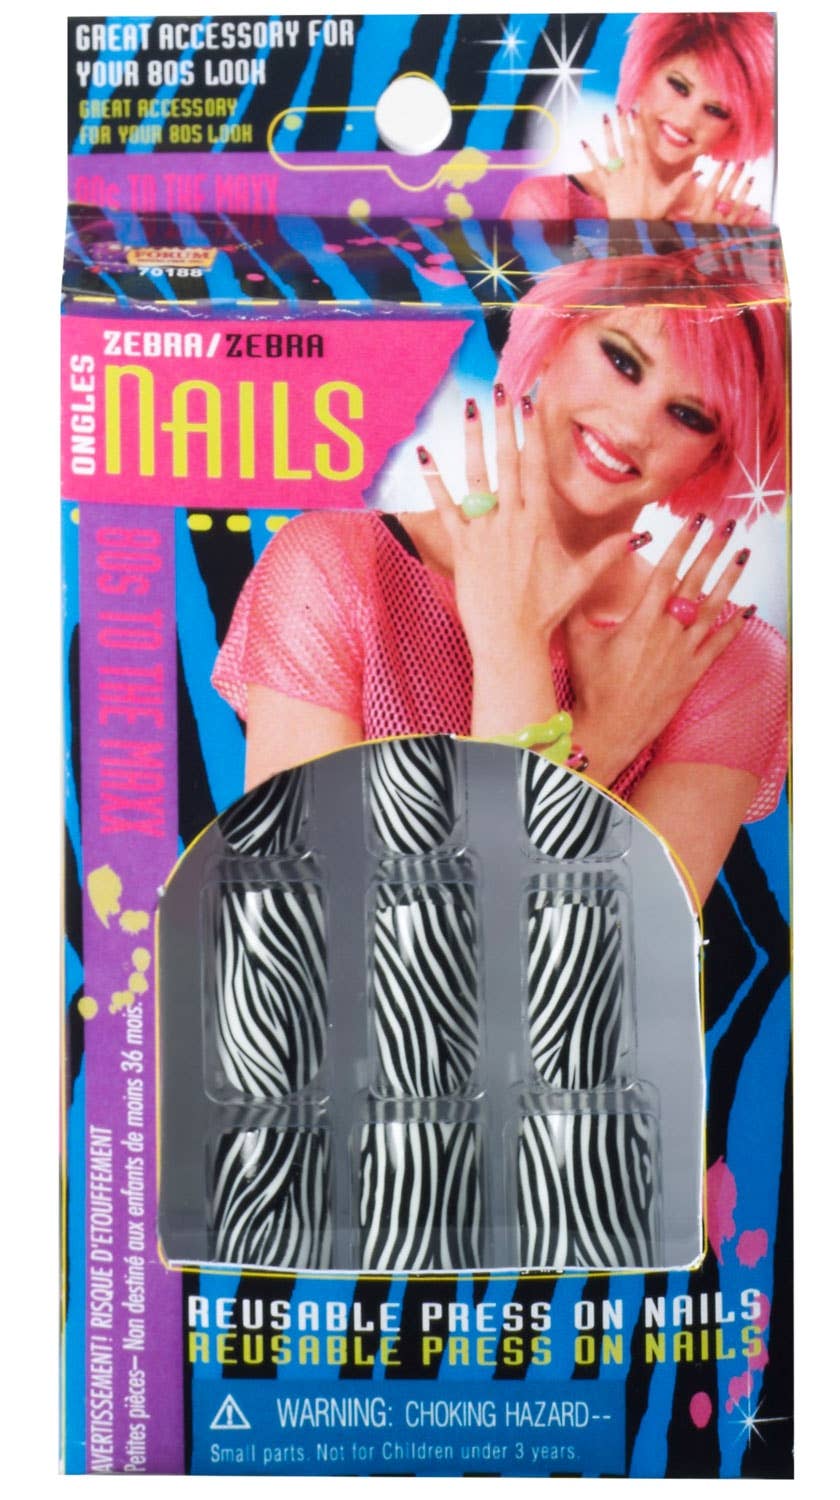 Zebra Animal Print Painted Stick On Nails Reusable 80s Costume Accessory 